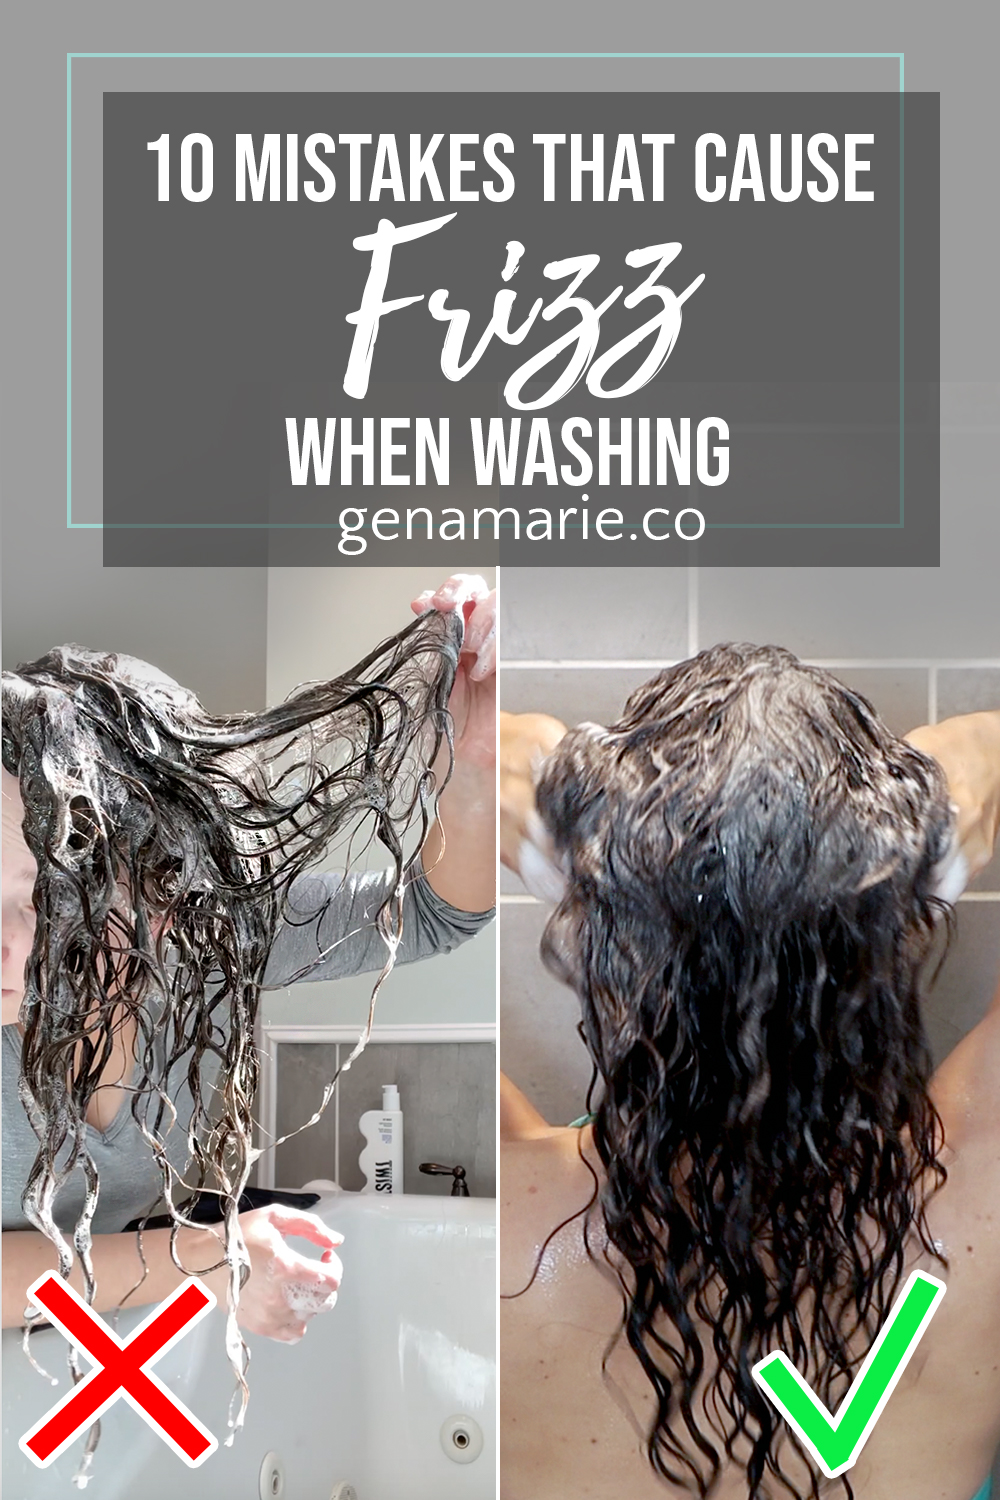 10 Mistakes that Cause Frizz When Washing Curls ft. Twist - Gena Marie